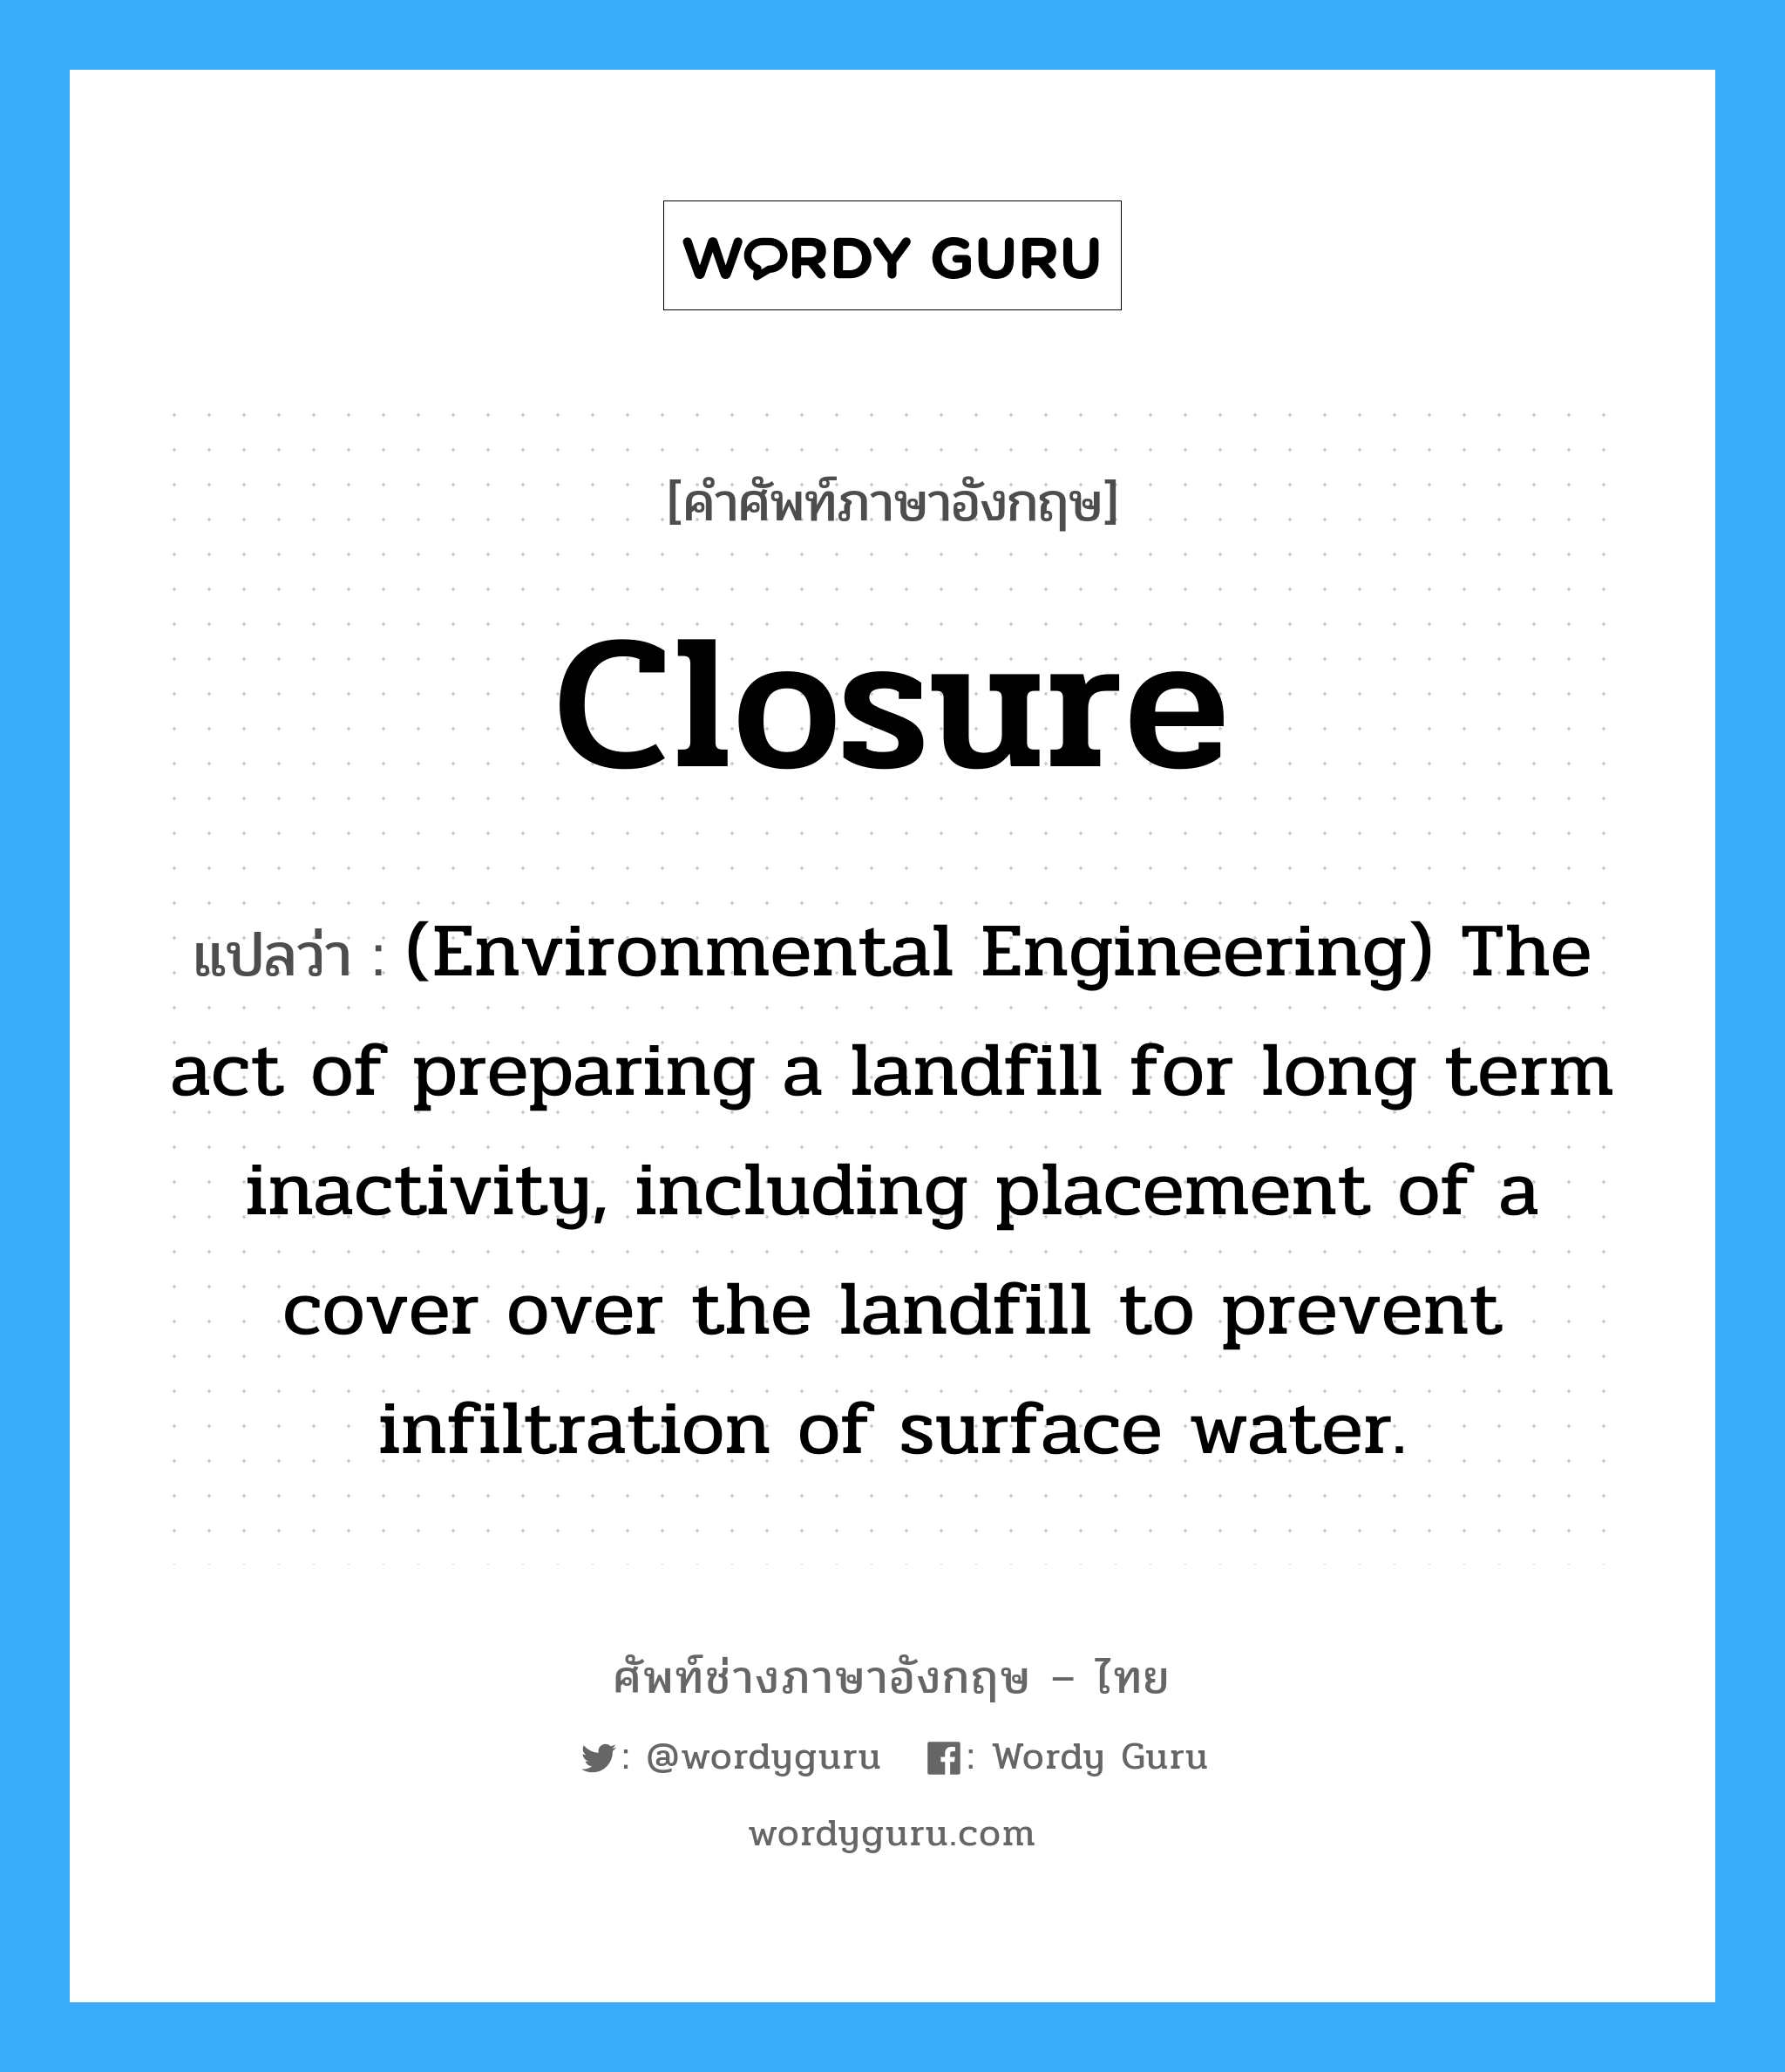 (Environmental Engineering) The act of preparing a landfill for long term inactivity, including placement of a cover over the landfill to prevent infiltration of surface water. ภาษาอังกฤษ?, คำศัพท์ช่างภาษาอังกฤษ - ไทย (Environmental Engineering) The act of preparing a landfill for long term inactivity, including placement of a cover over the landfill to prevent infiltration of surface water. คำศัพท์ภาษาอังกฤษ (Environmental Engineering) The act of preparing a landfill for long term inactivity, including placement of a cover over the landfill to prevent infiltration of surface water. แปลว่า Closure